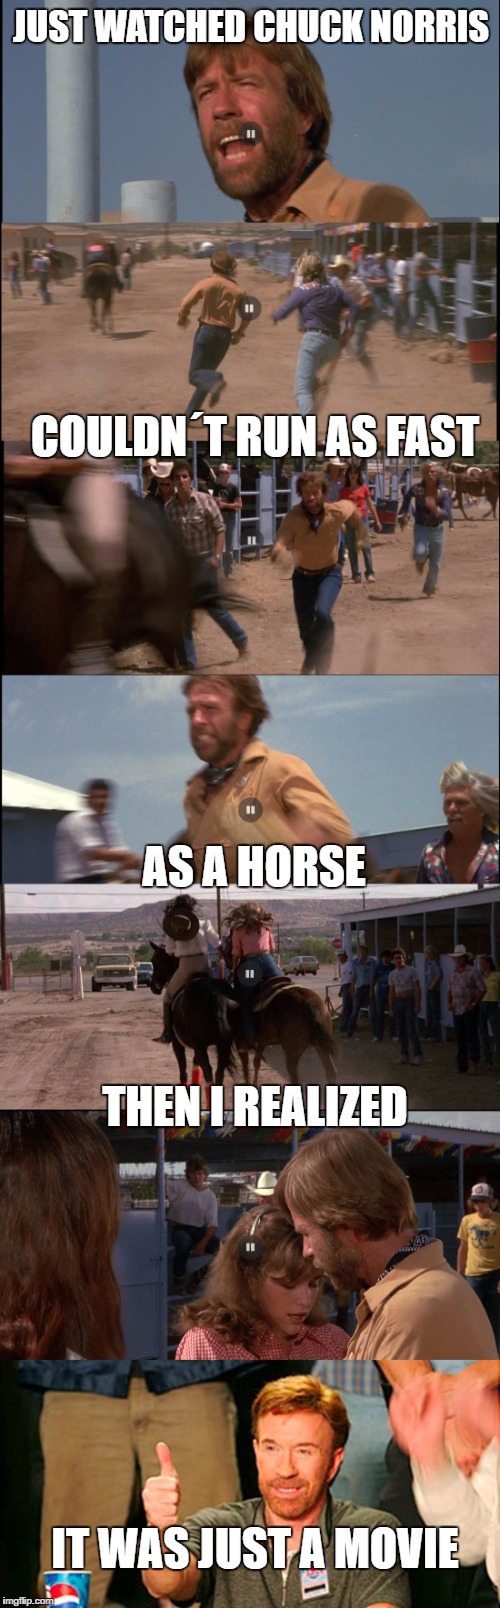 Bad running Chuck | JUST WATCHED CHUCK NORRIS; COULDN´T RUN AS FAST; AS A HORSE; THEN I REALIZED; IT WAS JUST A MOVIE | image tagged in chuck norris | made w/ Imgflip meme maker